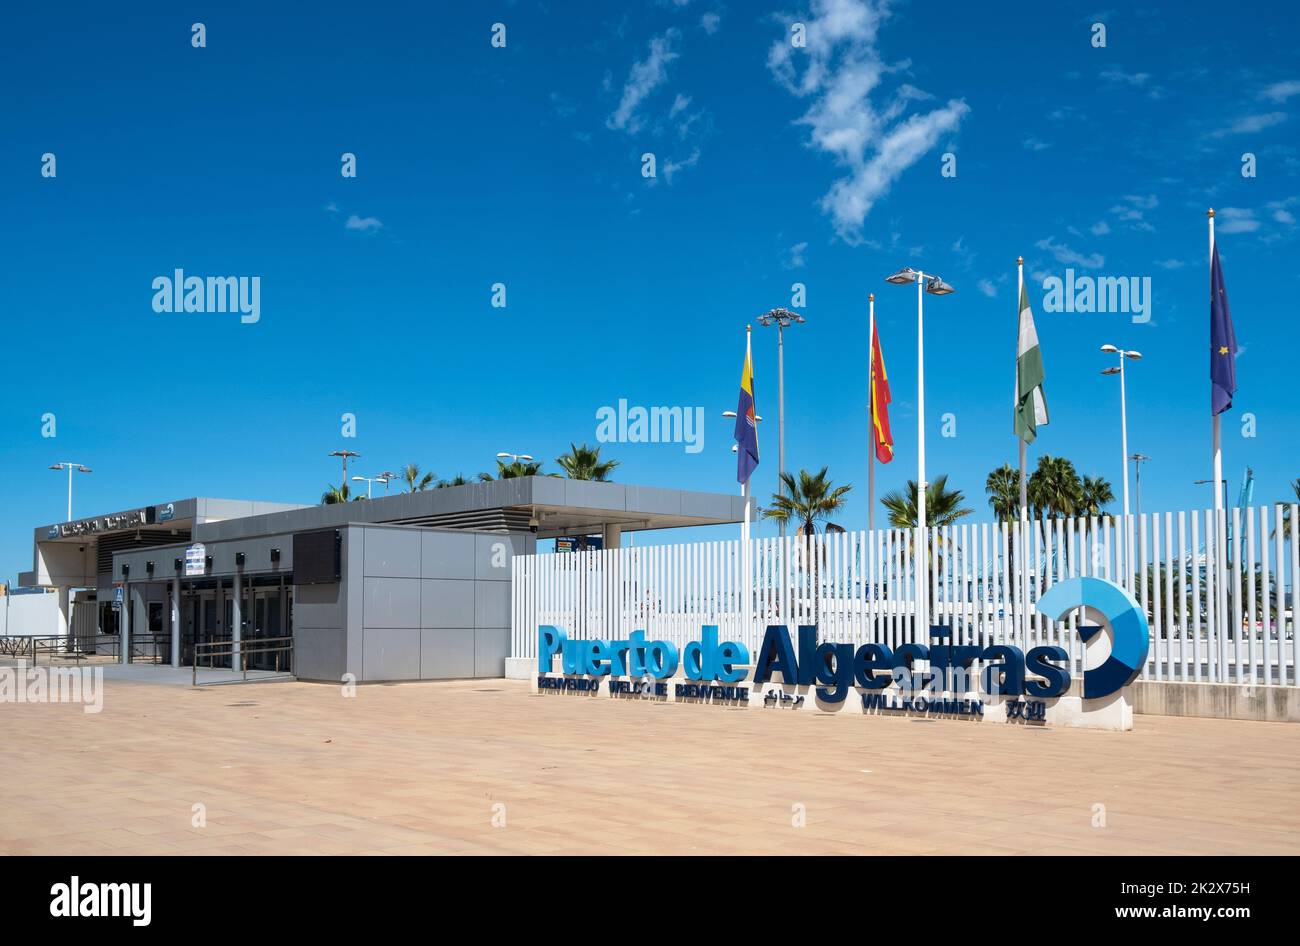 The welcome to Puerto de Algeciras (Port of Algeciras) logo sign with flag poles behind, which is situated near the main foot passenger entrance. Stock Photo